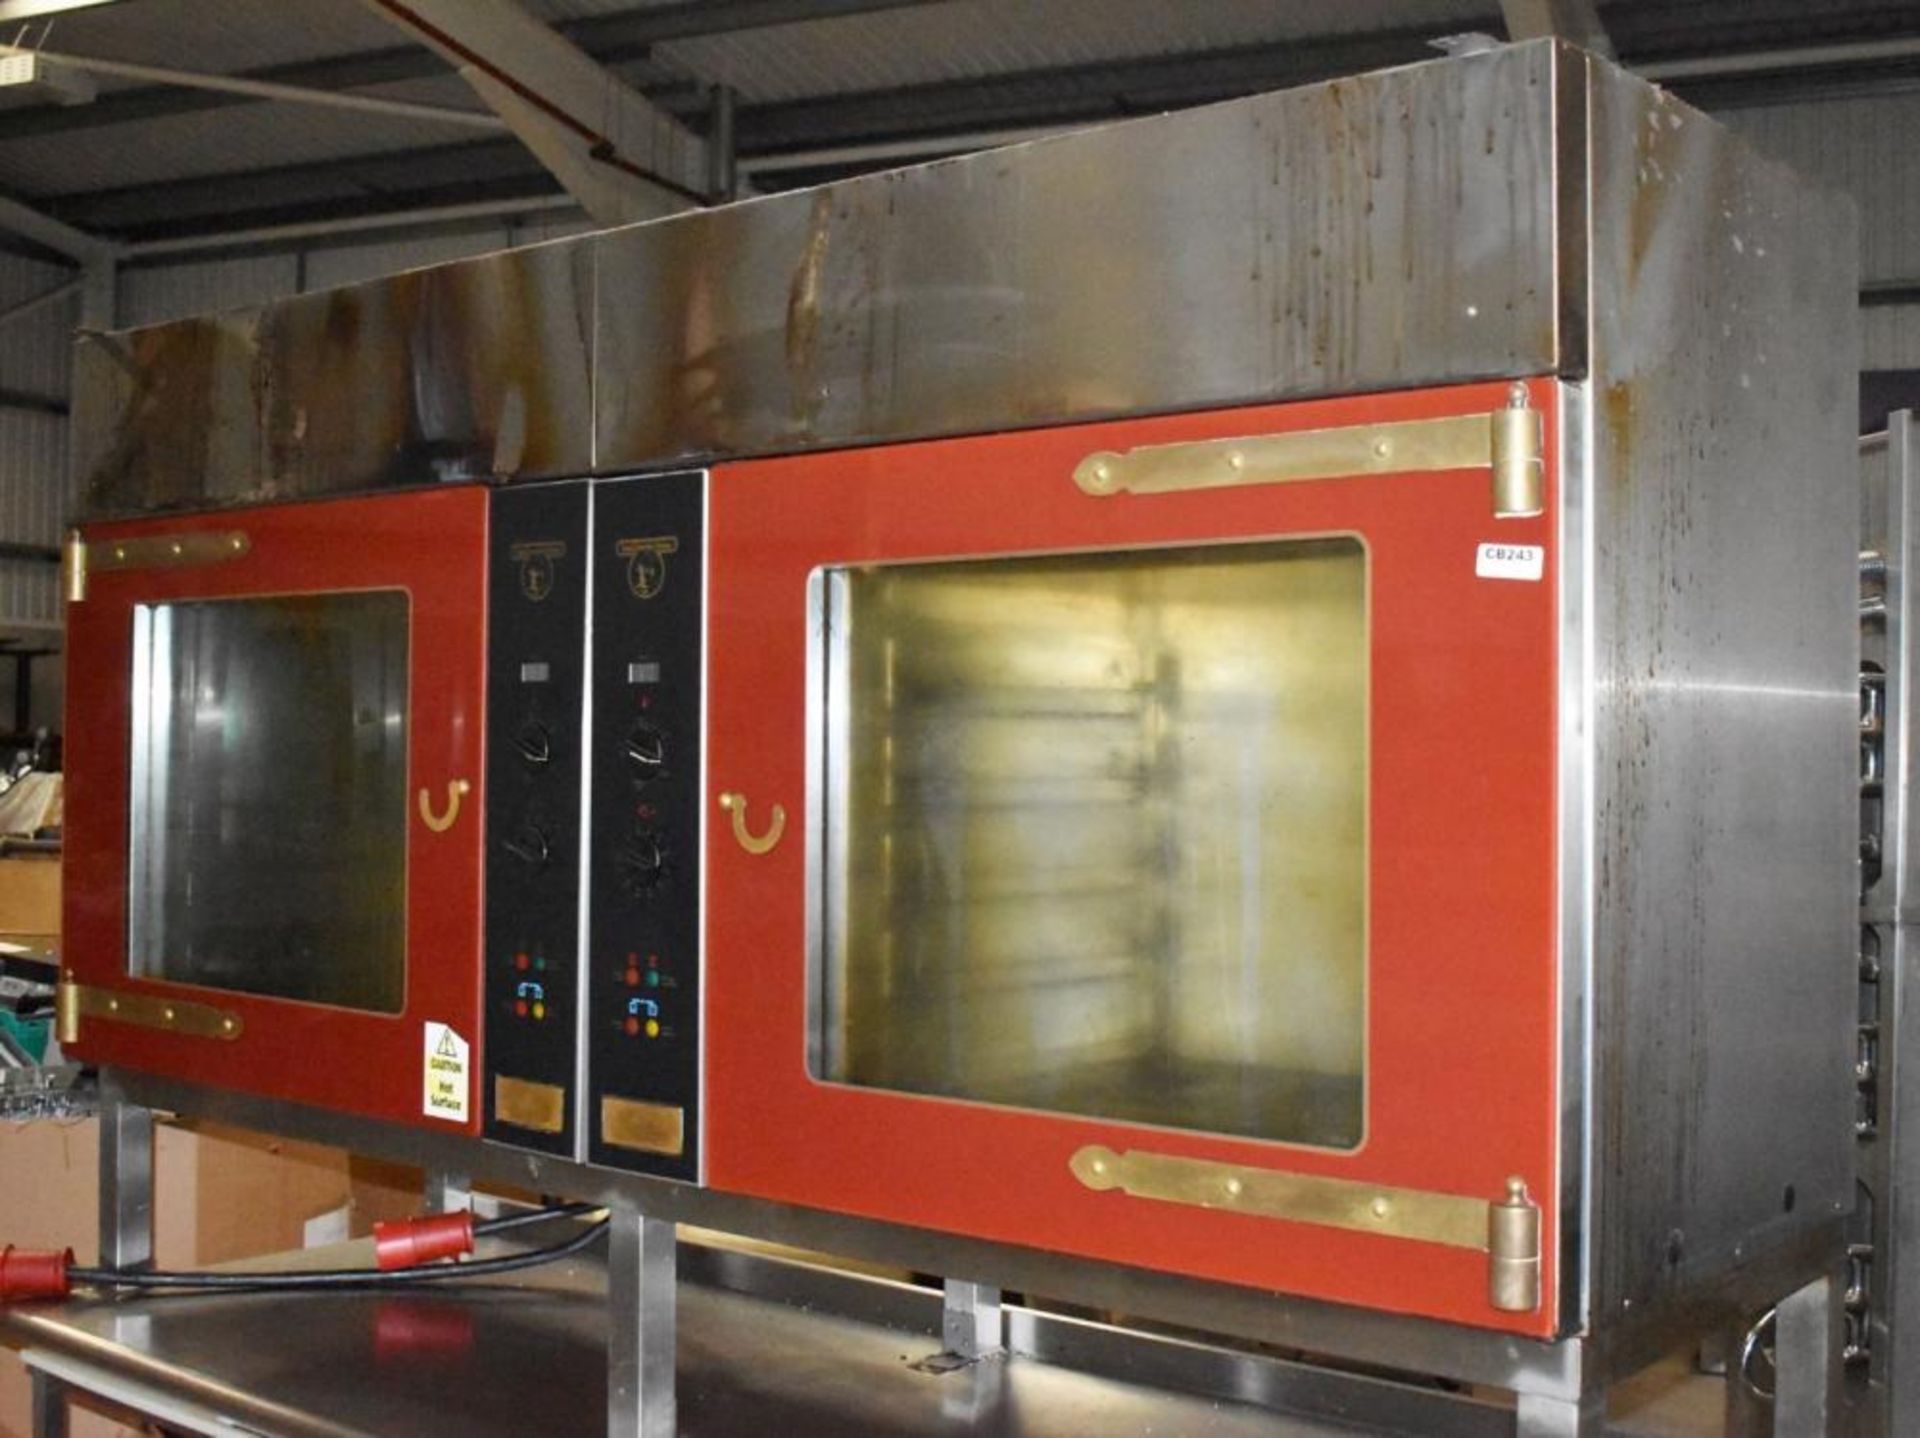 1 x Tom Chandley Double C5 60X40 Pie Oven With Stainless Steel Baking Tray Prep Bench - CL455 - Ref - Image 4 of 18